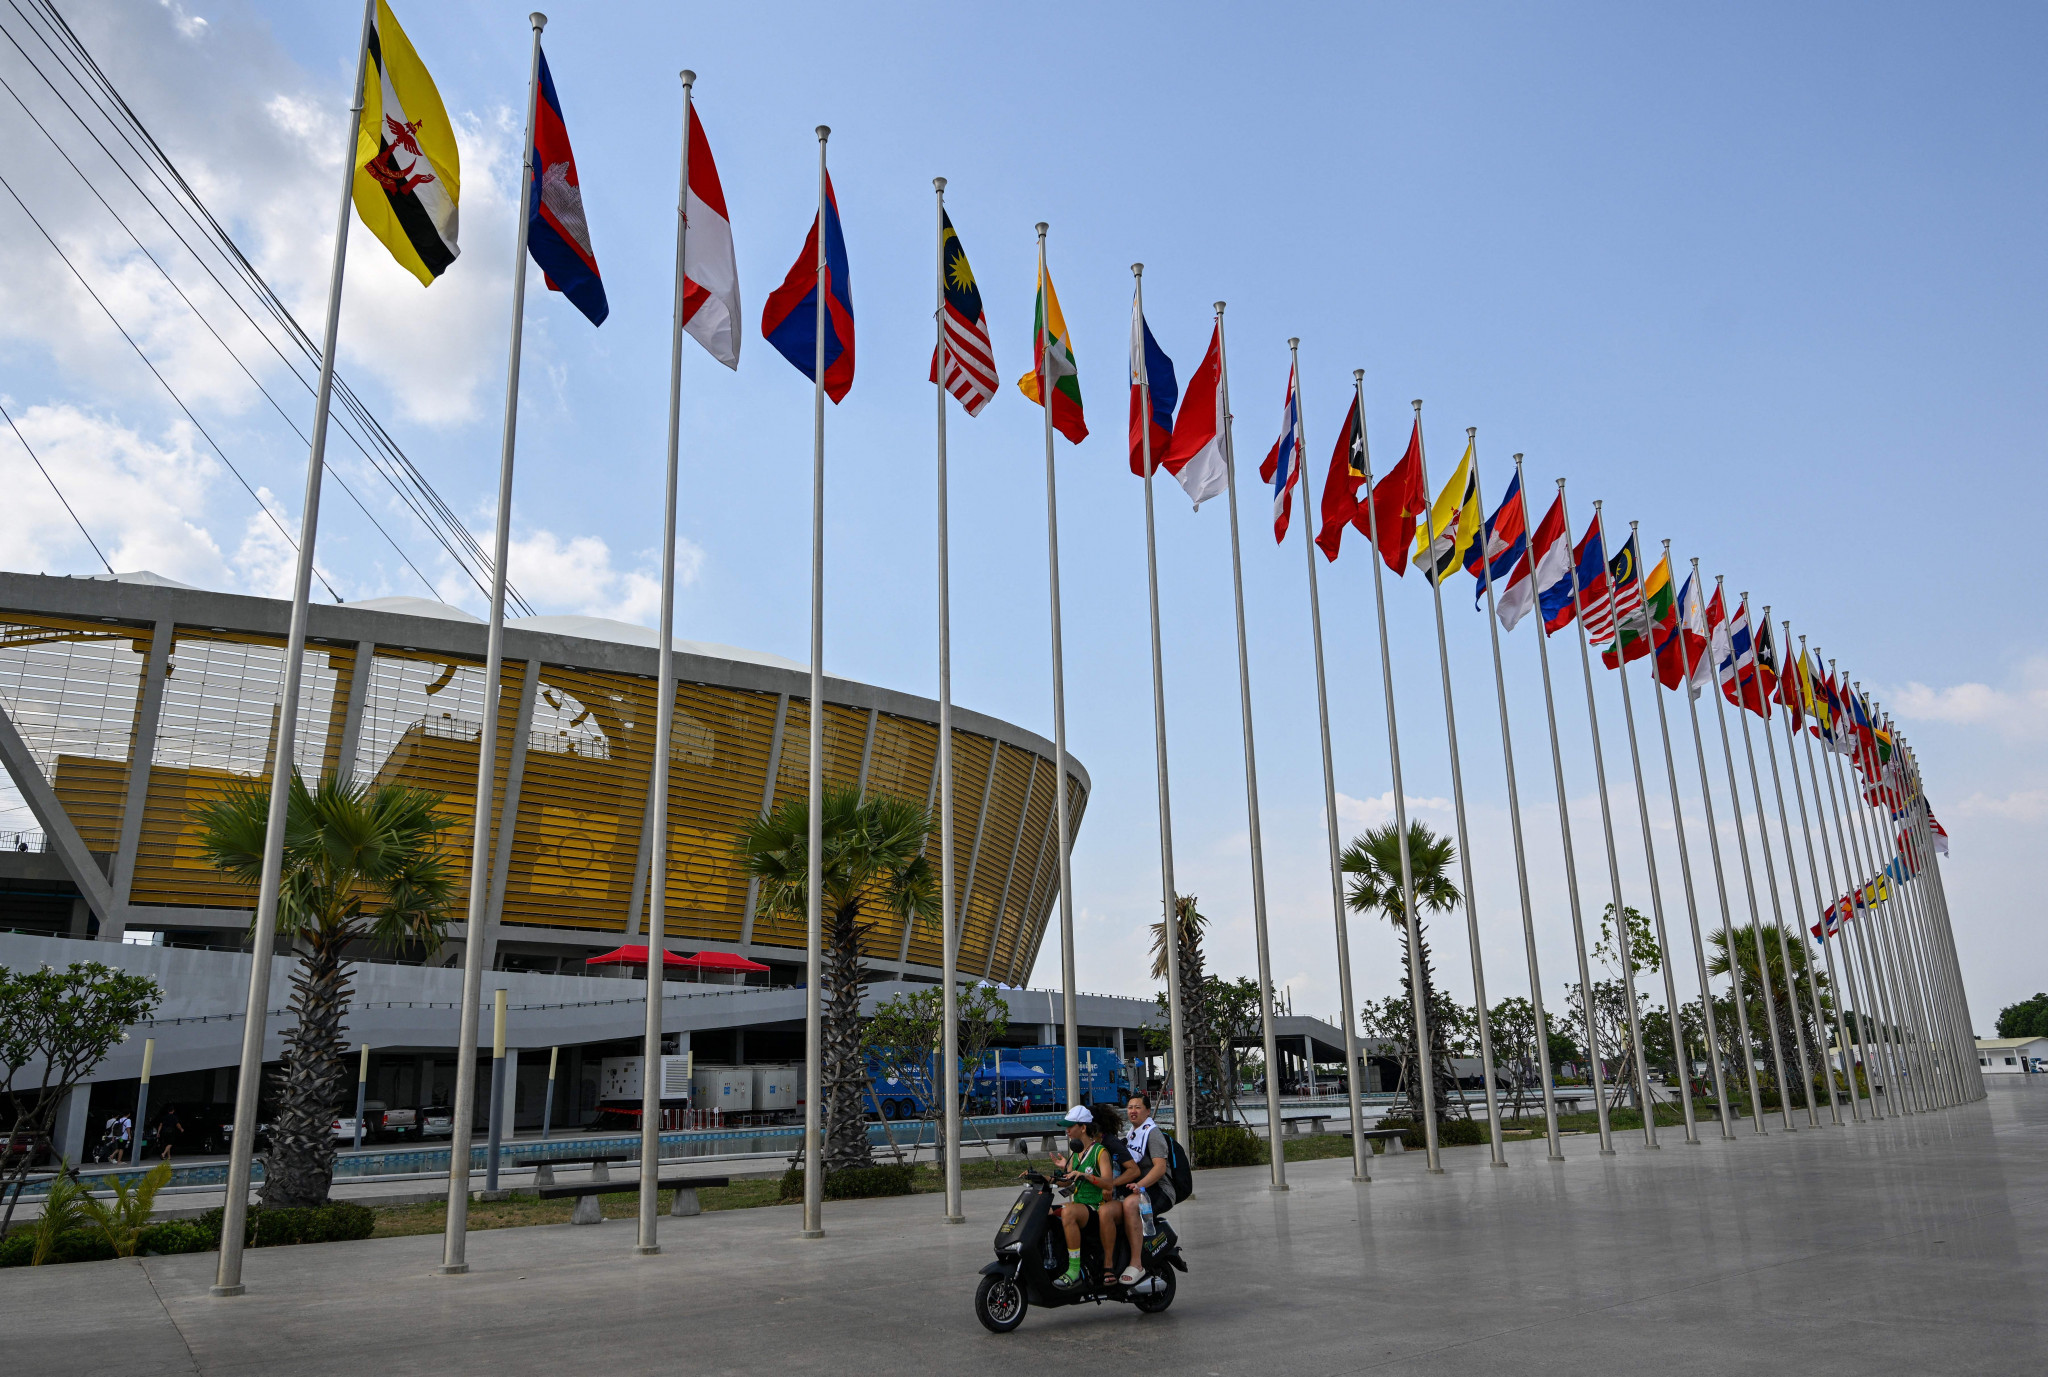 A total of 11 countries are set to take part at the Cambodia 2023 Southeast Asian Games ©Getty Images